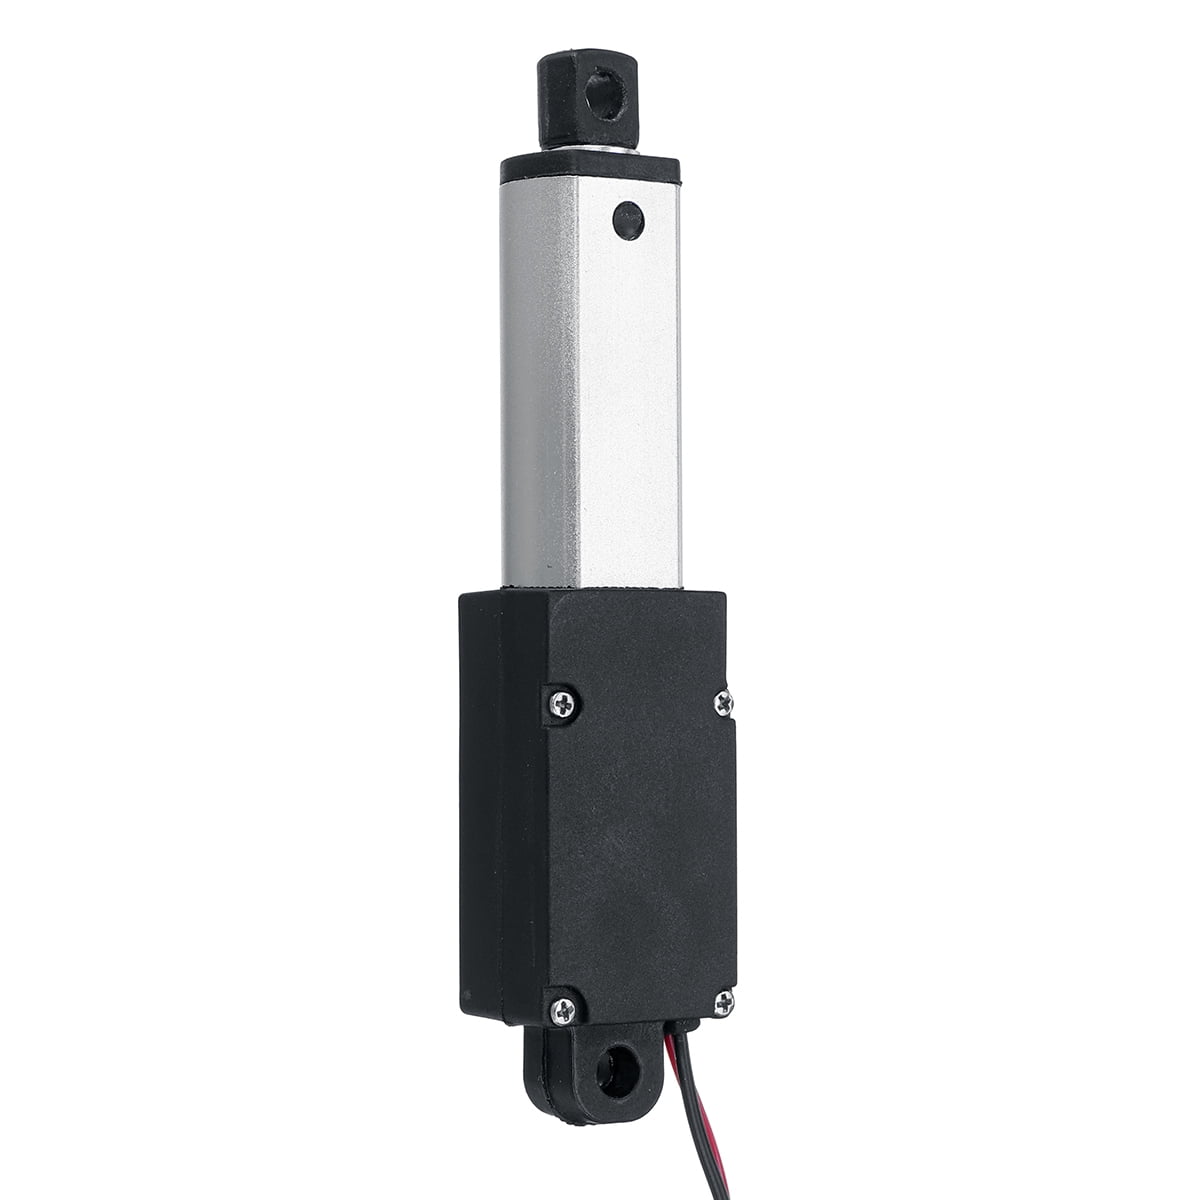 Details about   12V Micro Linear Actuator 25mm-150mm Electric 4.4 lbs Force IP65 Robotic Control 